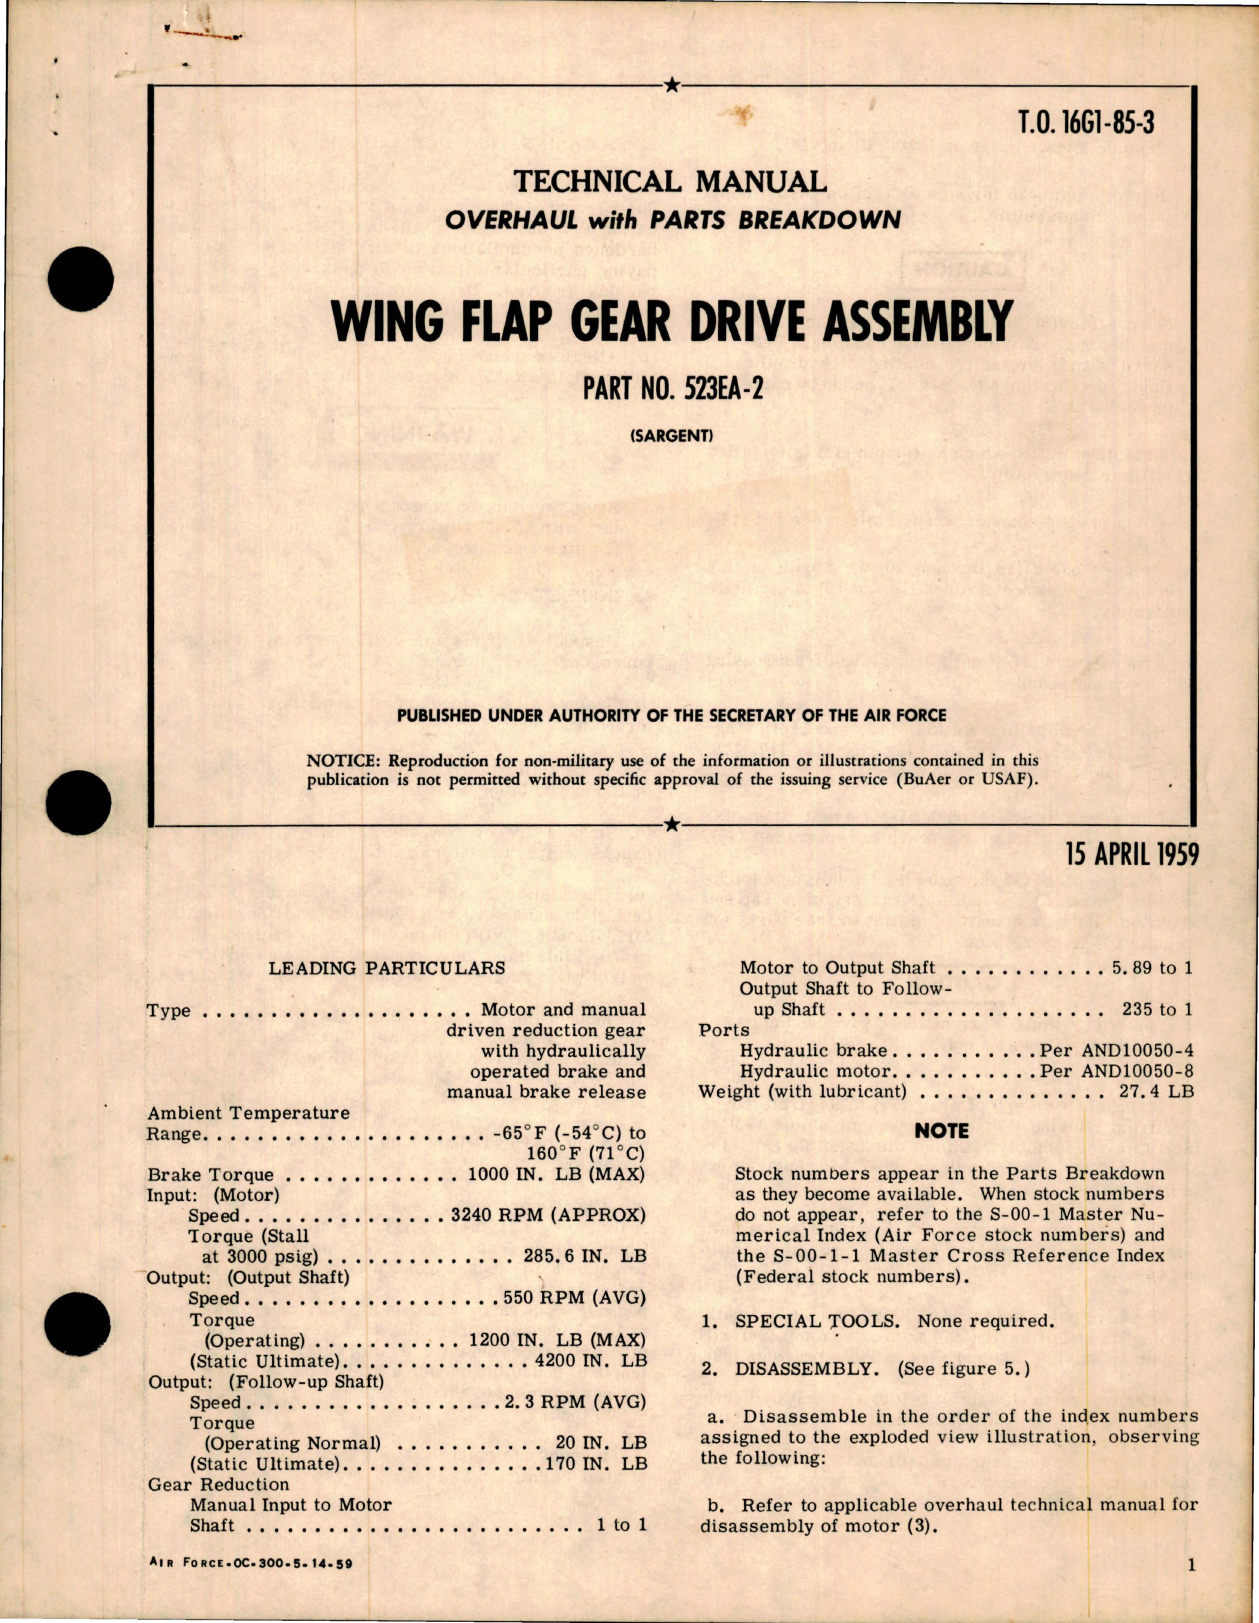 Sample page 1 from AirCorps Library document: Overhaul with Parts Breakdown for Wing Flap Gear Drive Assembly - Part 523EA-2 